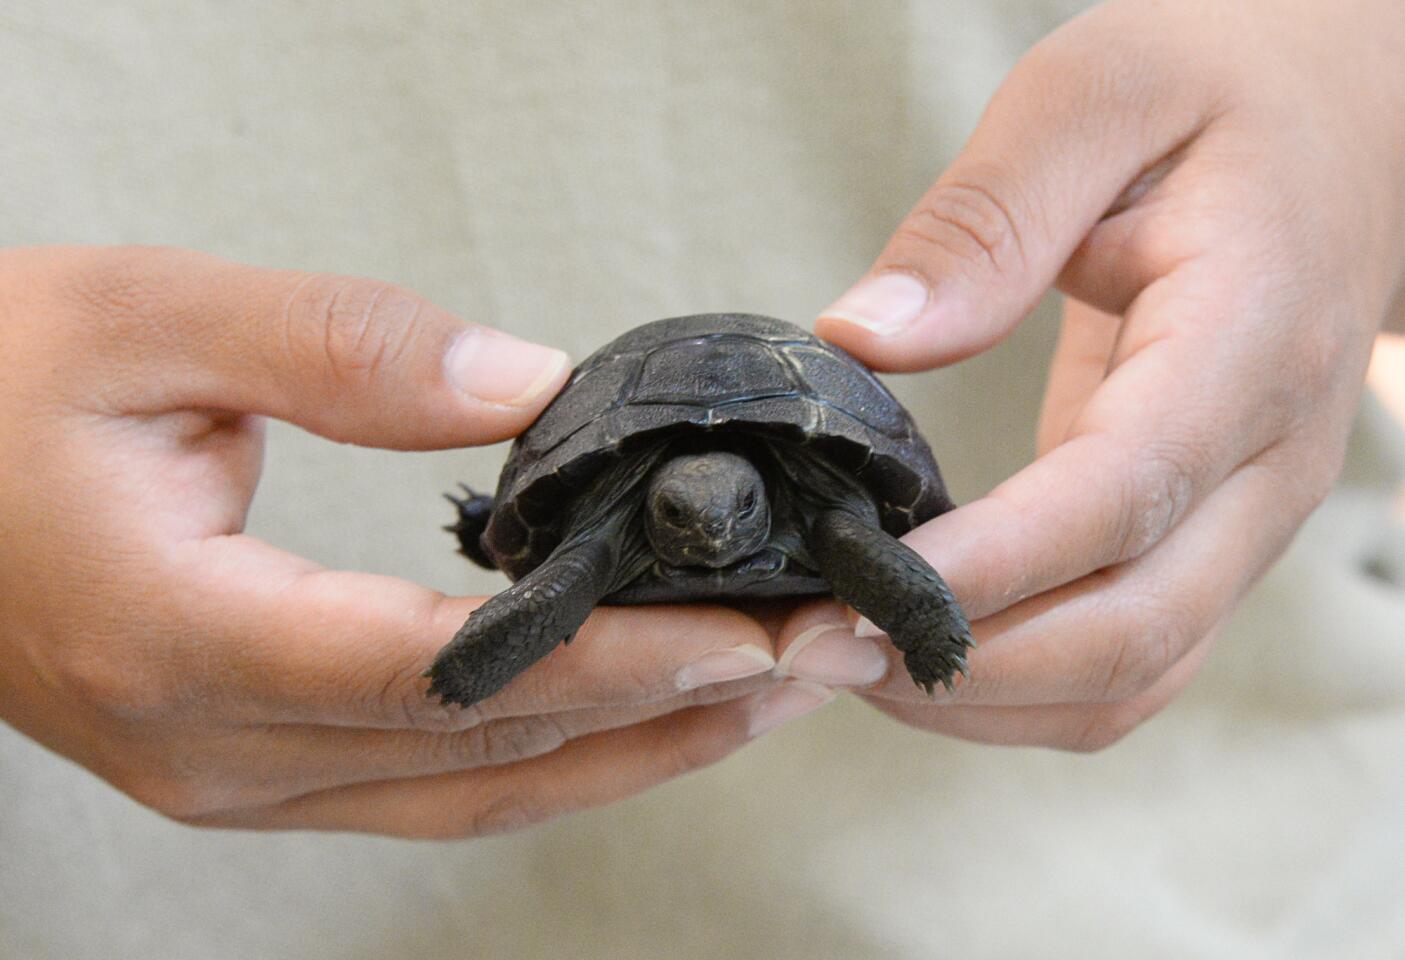 A month-old Galapagos tortoise is held by a zookeeper June 21, 2016, at the Gladys Porter Zoo in Brownsville, Texas. The zoo is currently waiting for several more eggs to hatch, incubating many to encourage the birth of females in order to help sustain the endangered species.